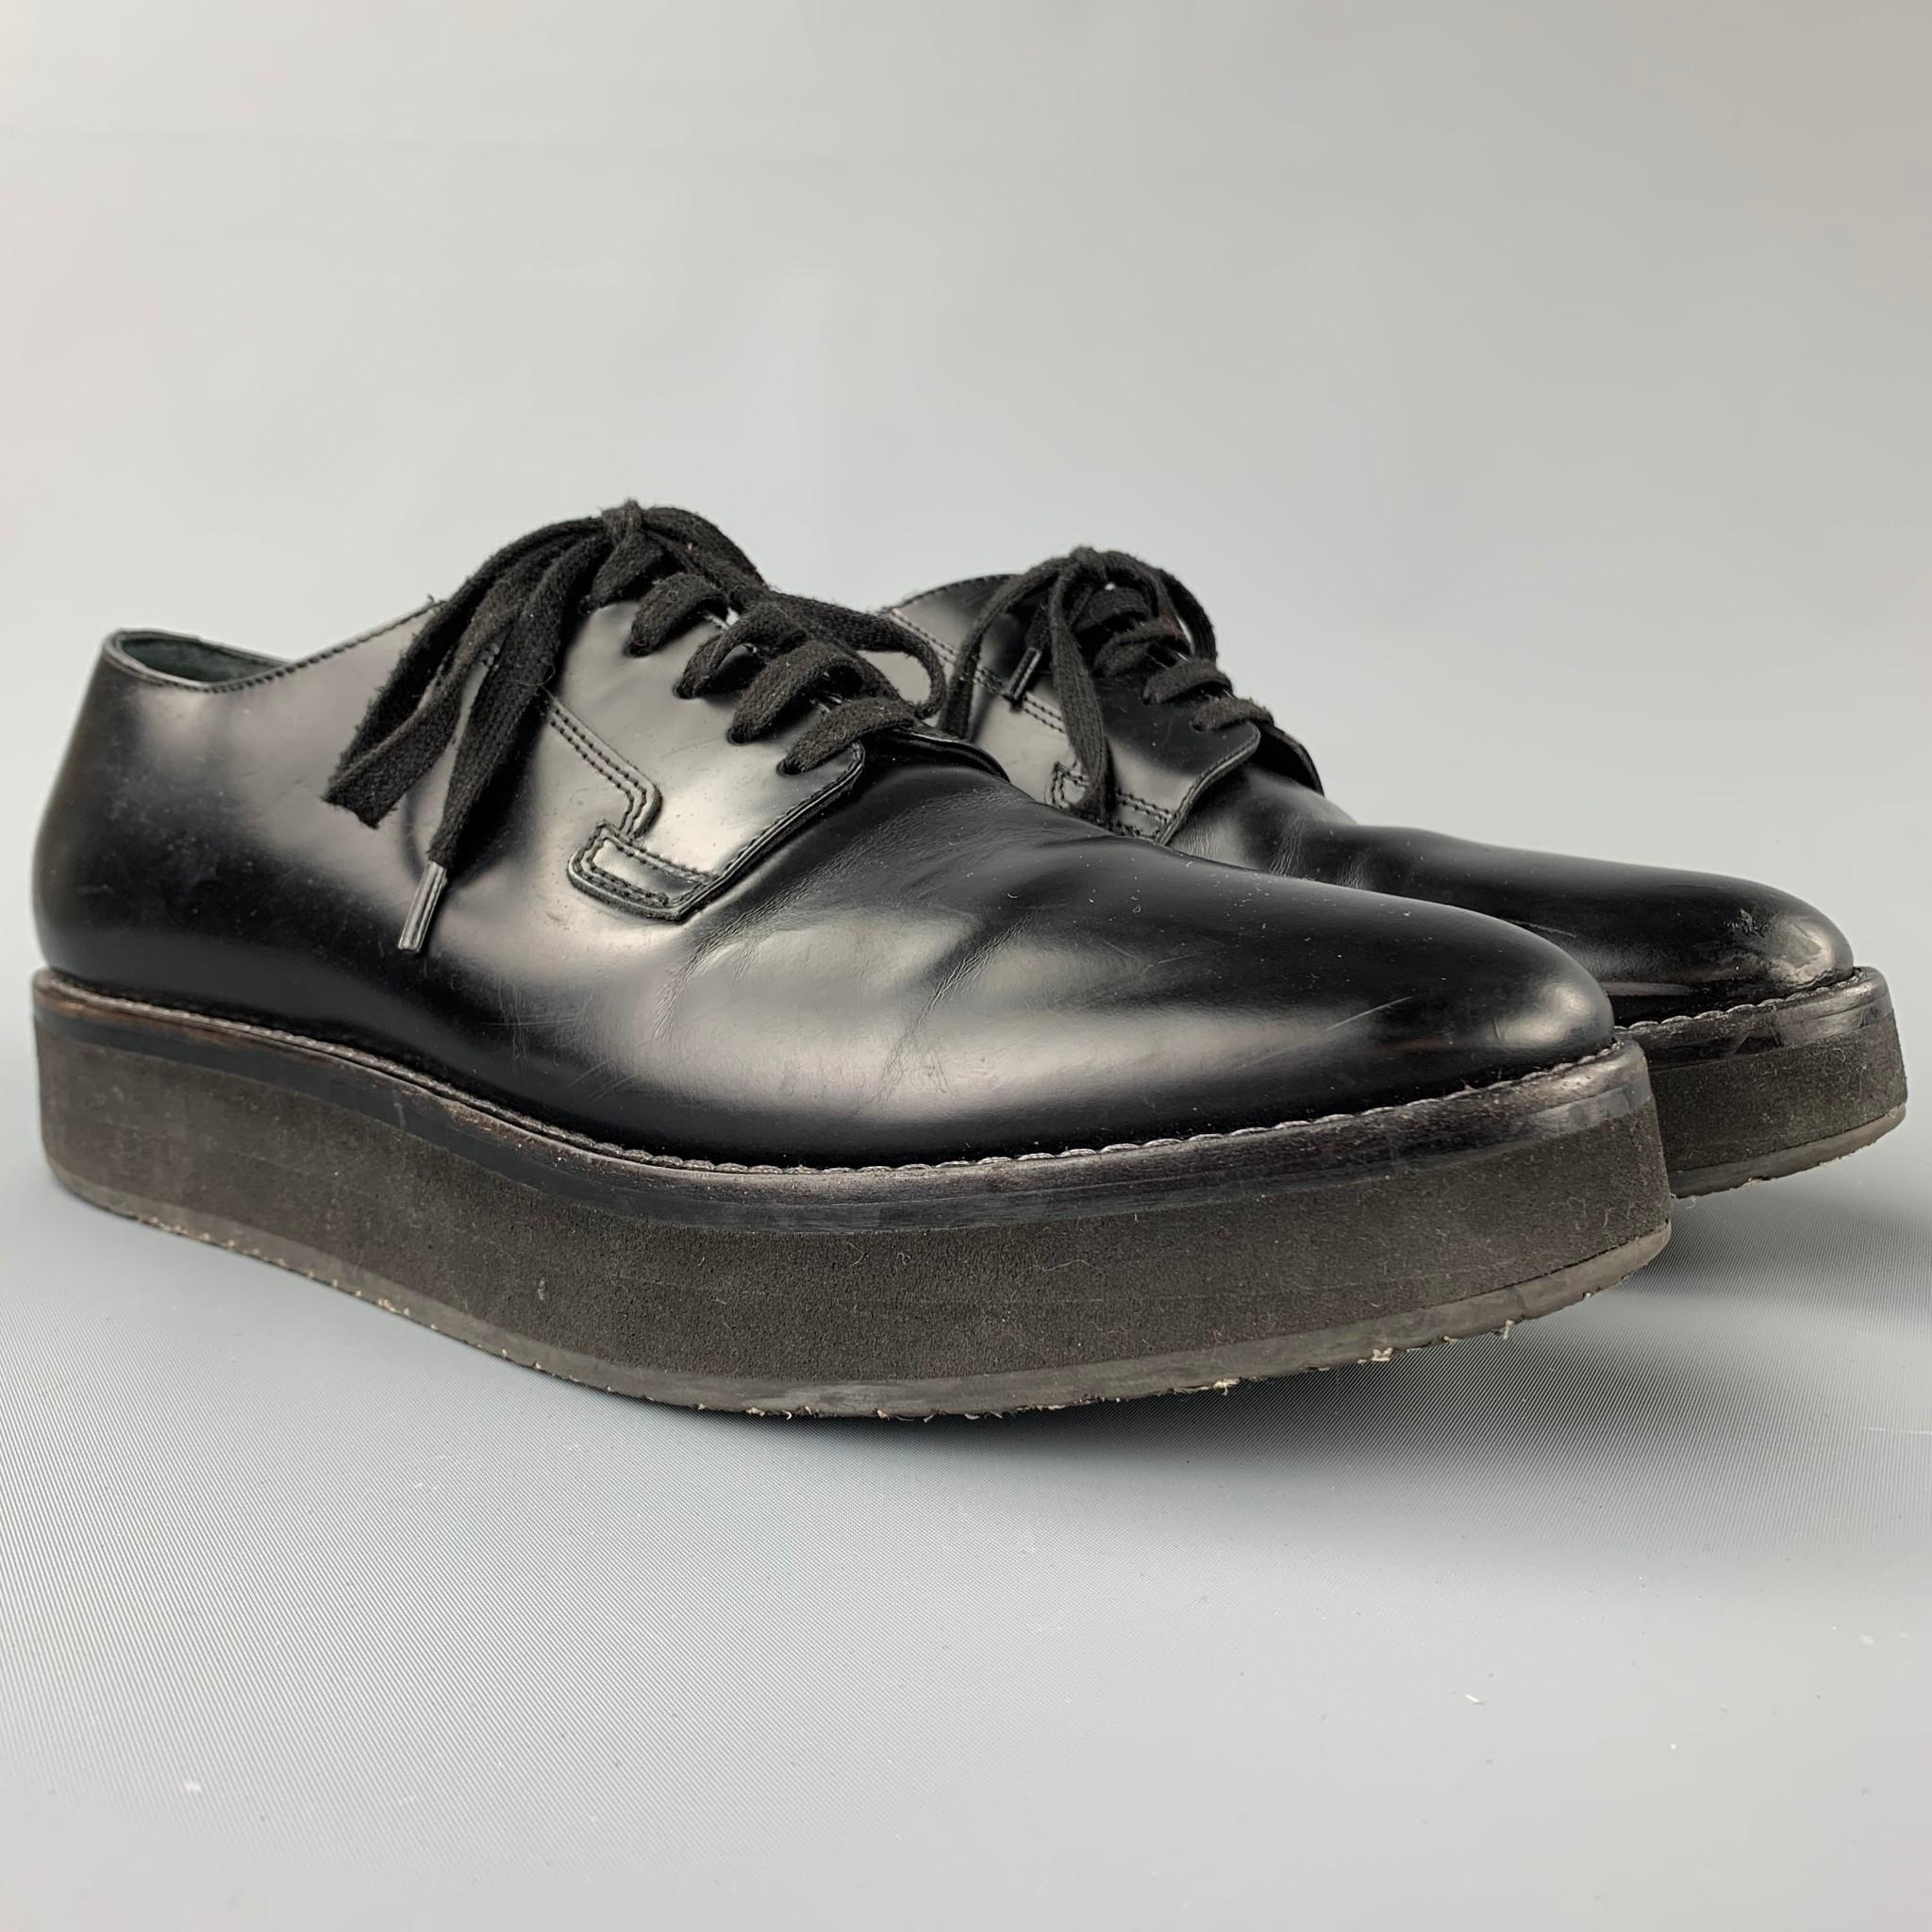 MARNI shoes comes in a black leather featuring a cap toe, chunky rubber sole, and a lace up closure. Made in Italy.

Very Good Pre-Owned Condition.
Marked: EU 44

Outsole:

12 in. x 4 in. 